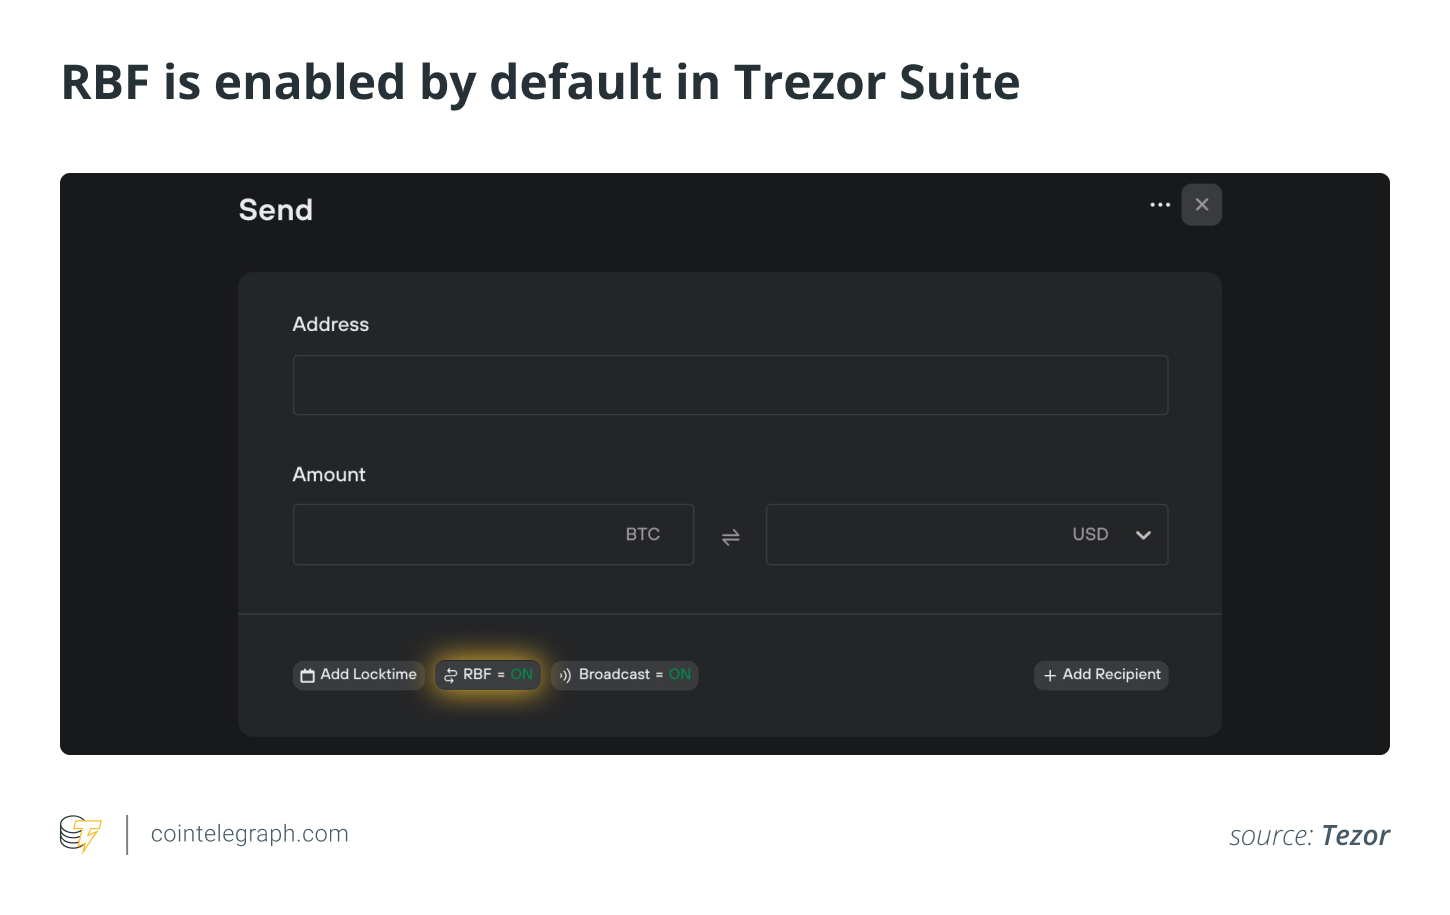 RBF is enabled by default in Trezor Suite